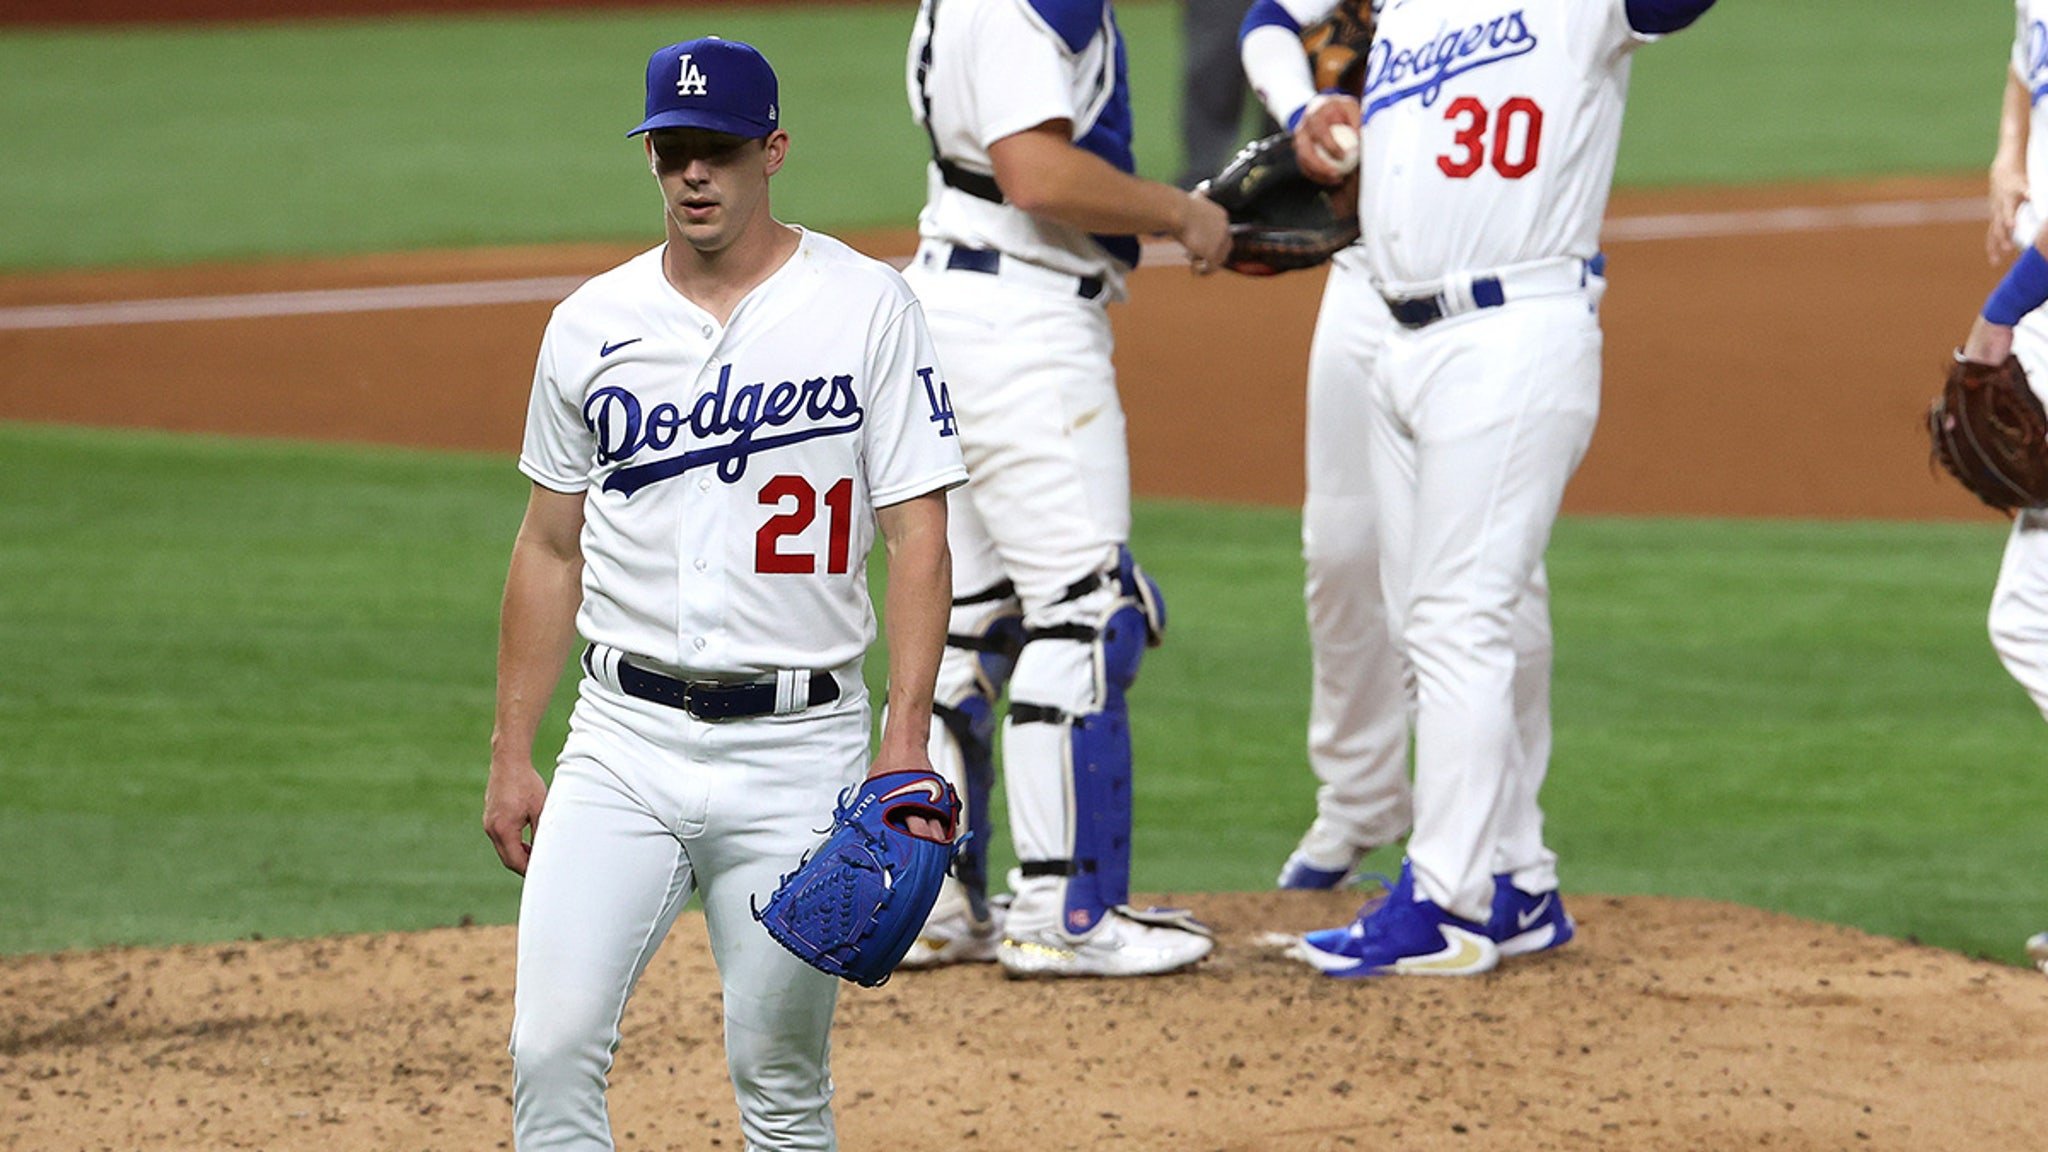 Dodgers' Walker Buehler Suffocates Legs In Super Tight Pants ... What's the Deal, Bro?!